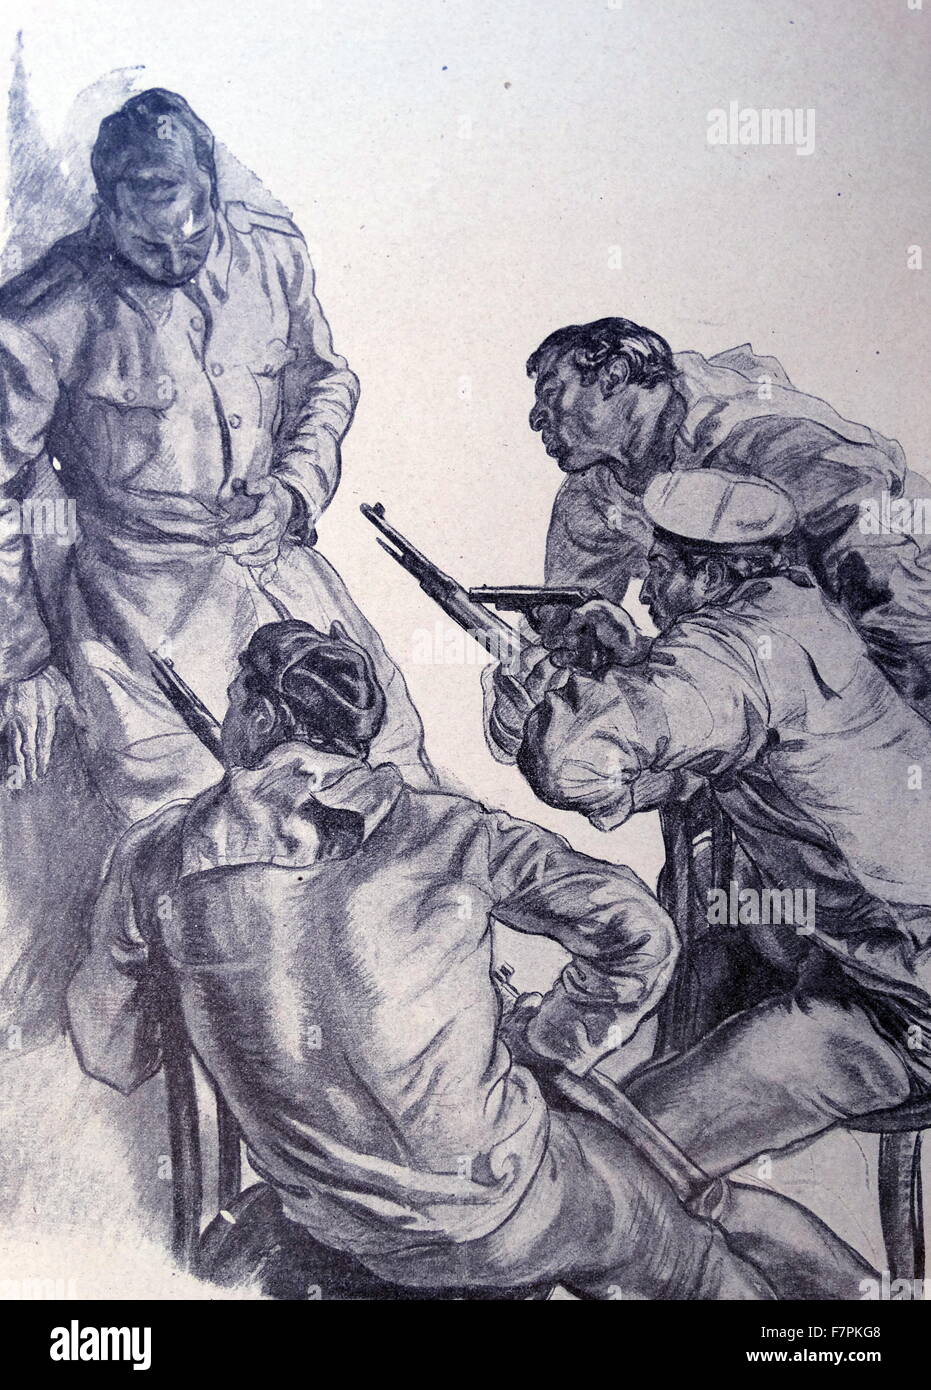 Propaganda illustration by Carlos Saenz De Tejada depicting a naval officer being shot by Republican mutineers, during the Spanish Civil War. Dated 1938 Stock Photo